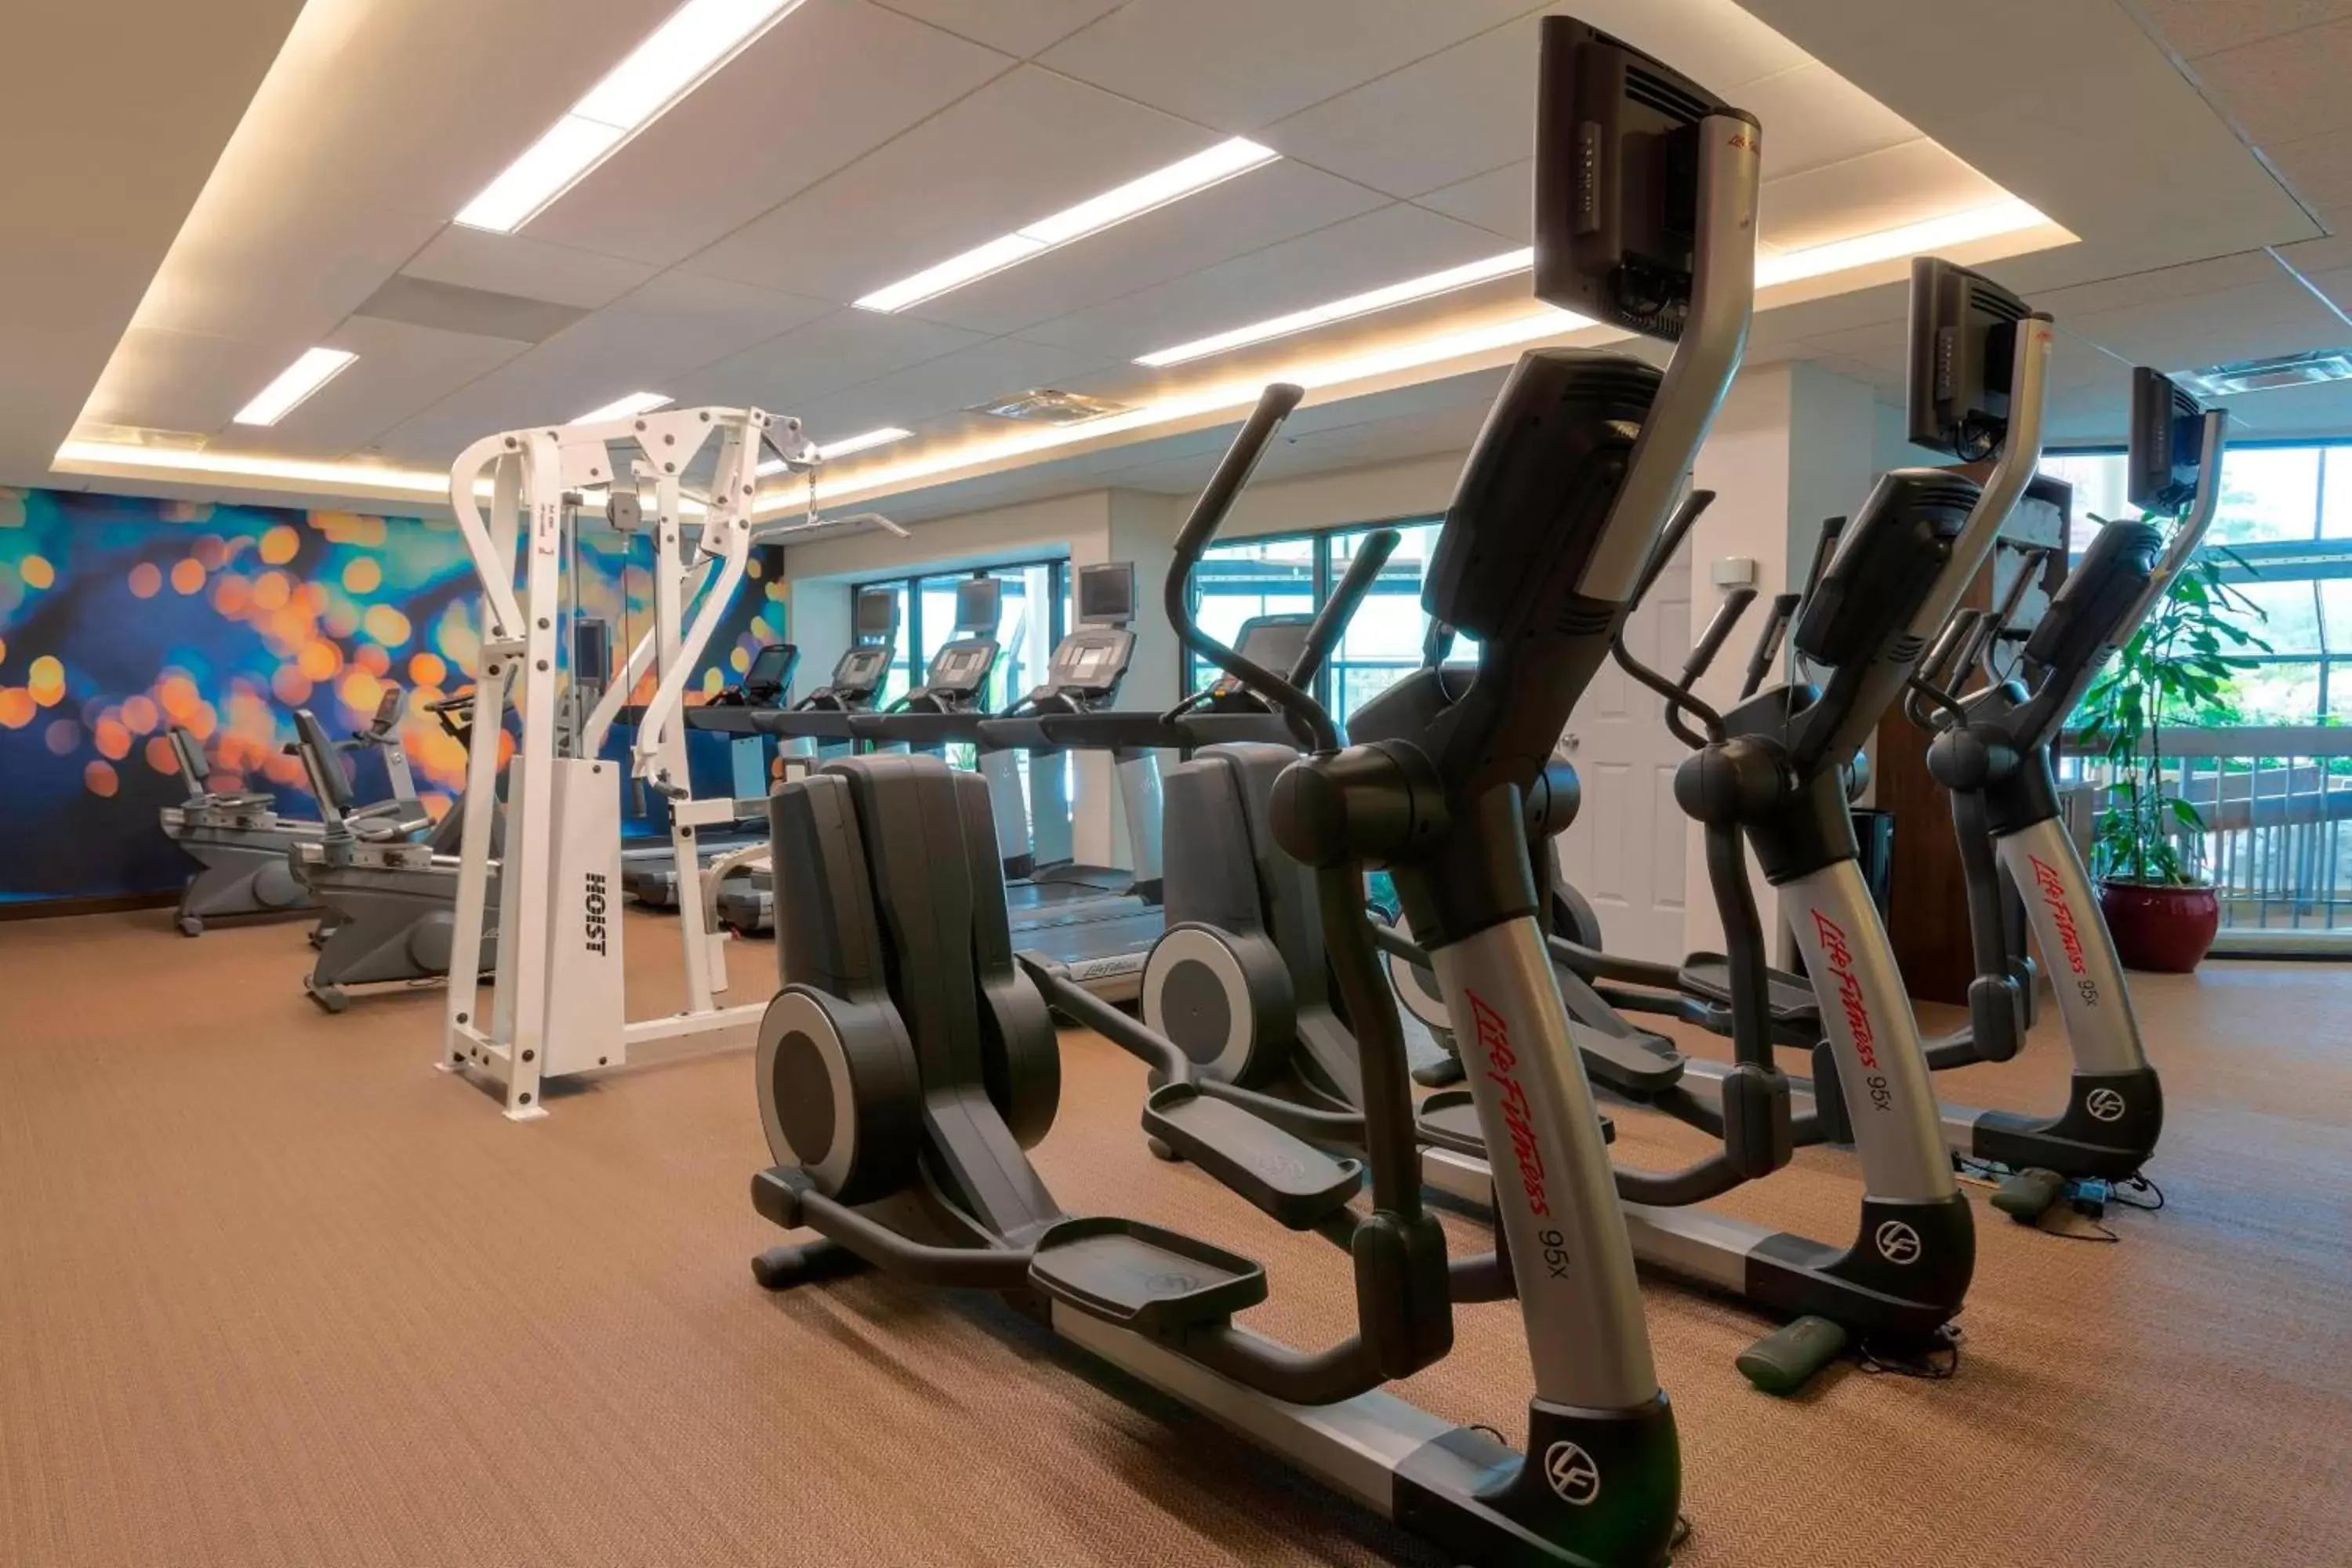 Fitness centre/facilities, Fitness Center/Facilities in Greensboro-High Point Marriott Airport